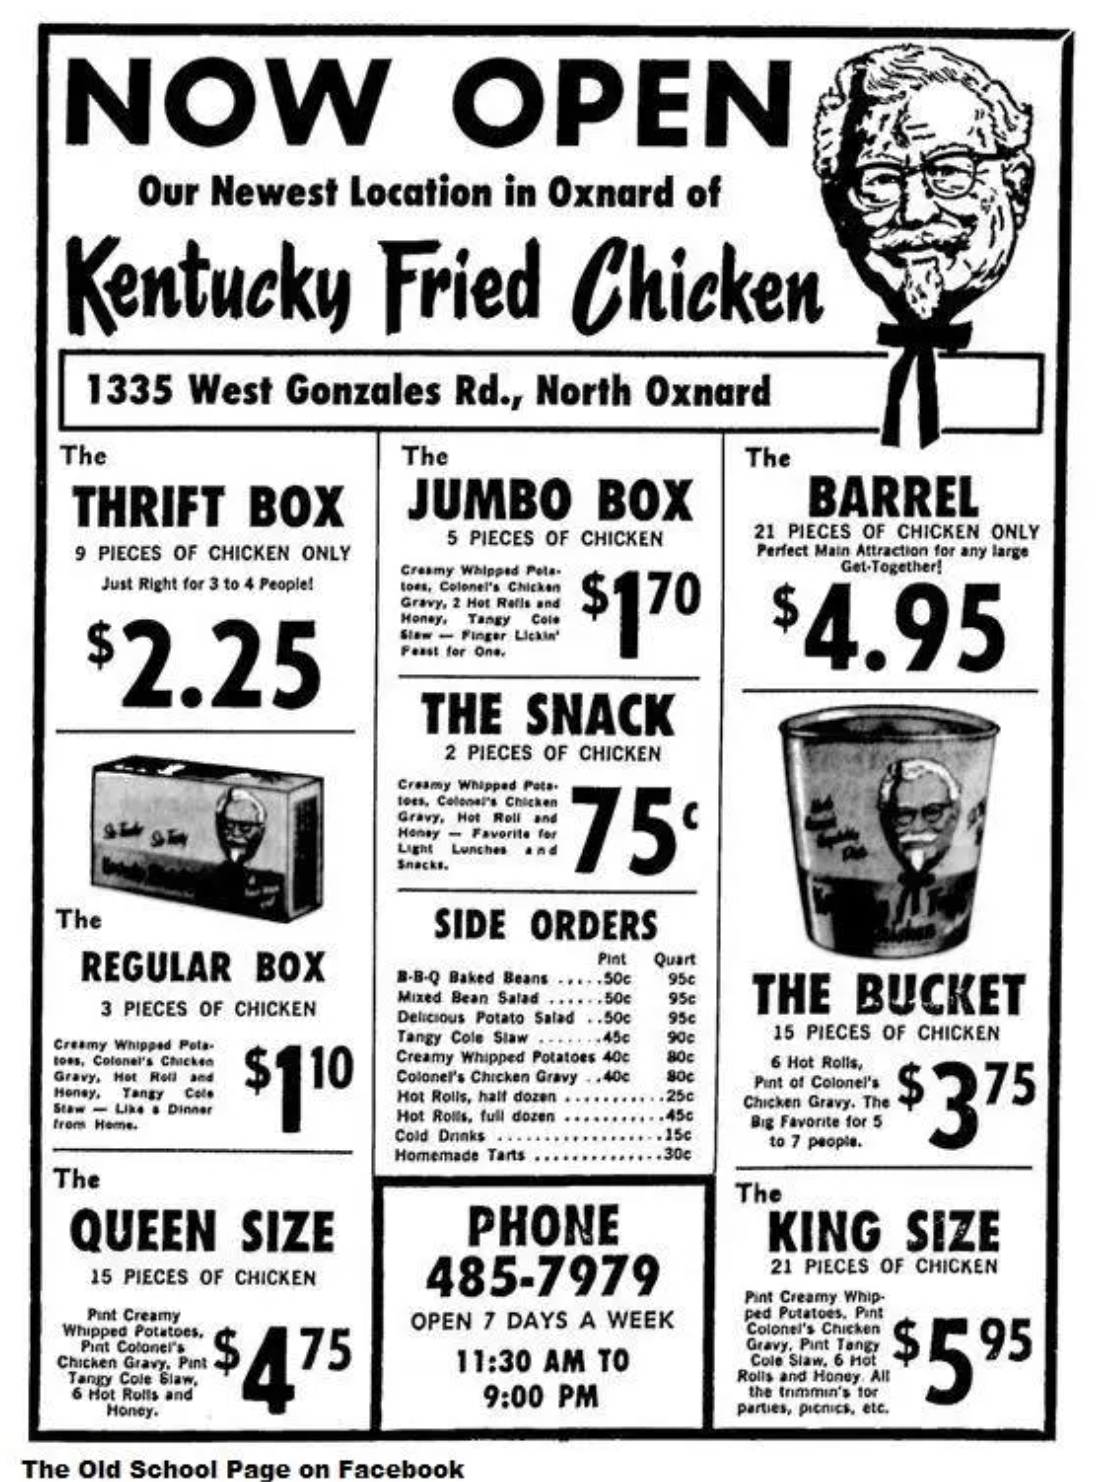 illustration - Now Open Our Newest Location in Oxnard of Kentucky Fried Chicken 1335 West Gonzales Rd., North Oxnard The The Thrift Box Jumbo Box 9 Pieces Of Chicken Only Just Right for 3 to 4 People! $2.25 The Regular Box The 3 Pieces Of Chicken $110 Que